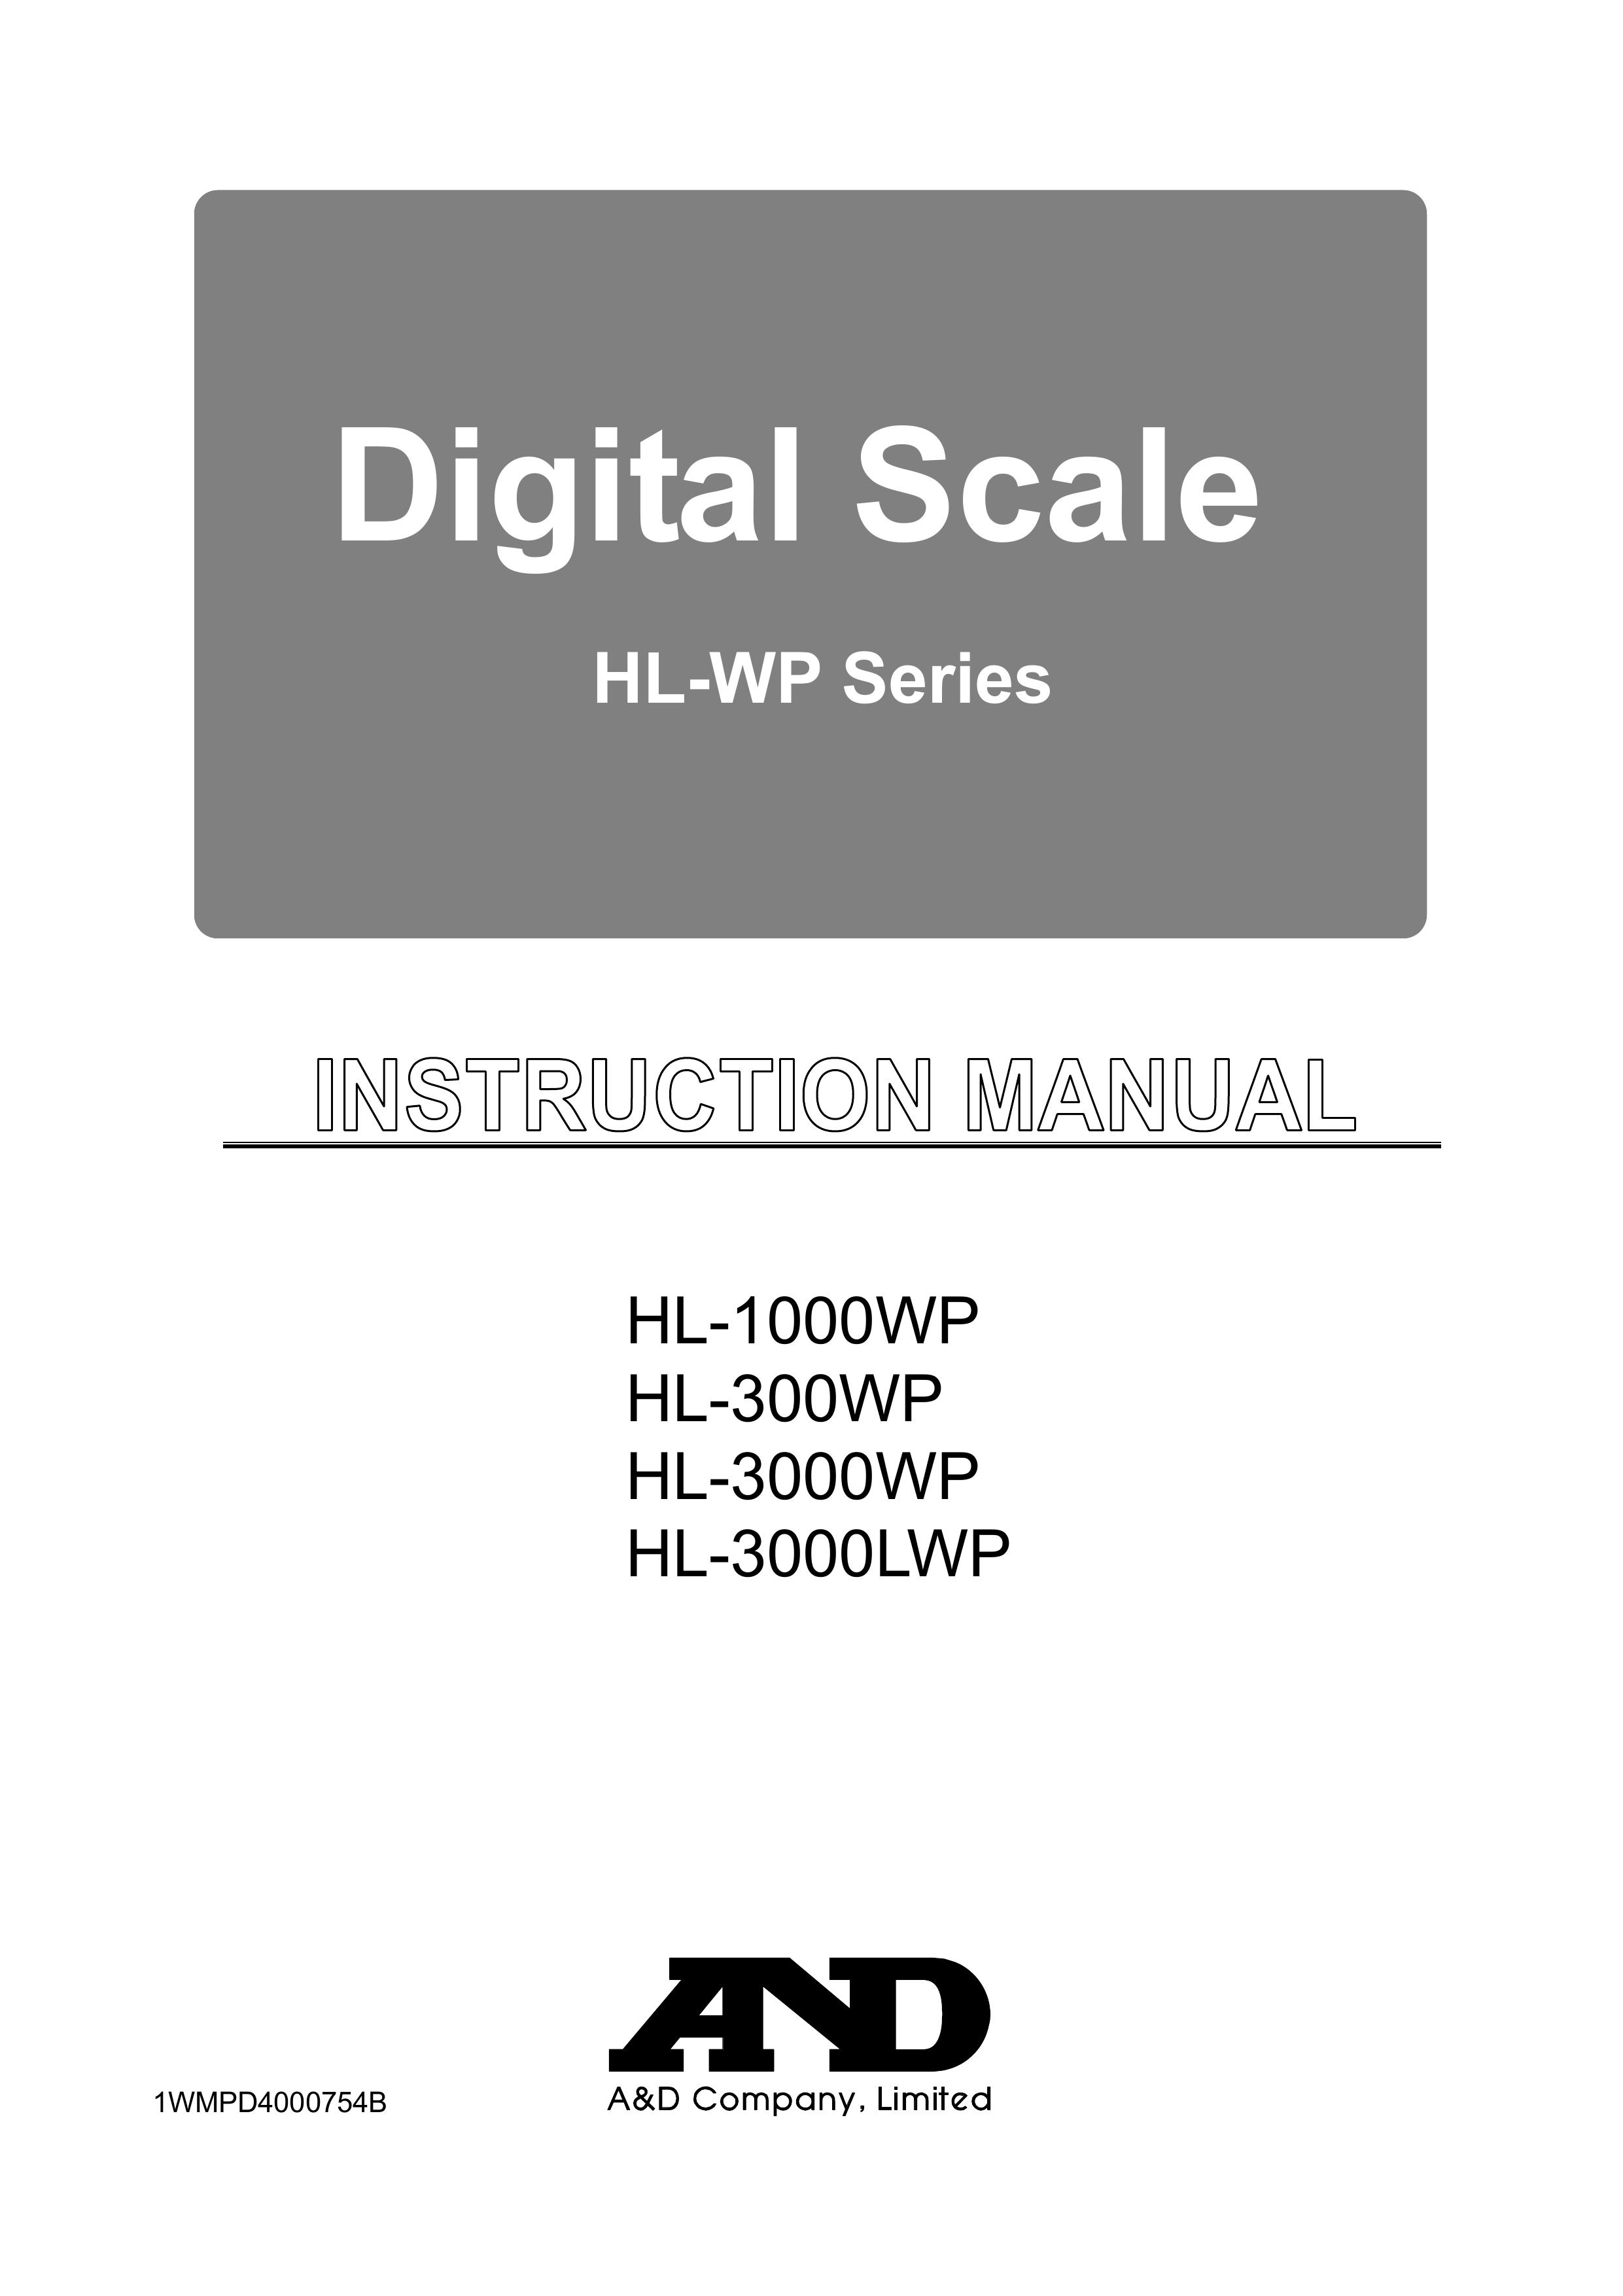 A&D HL-3000WP Scale User Manual